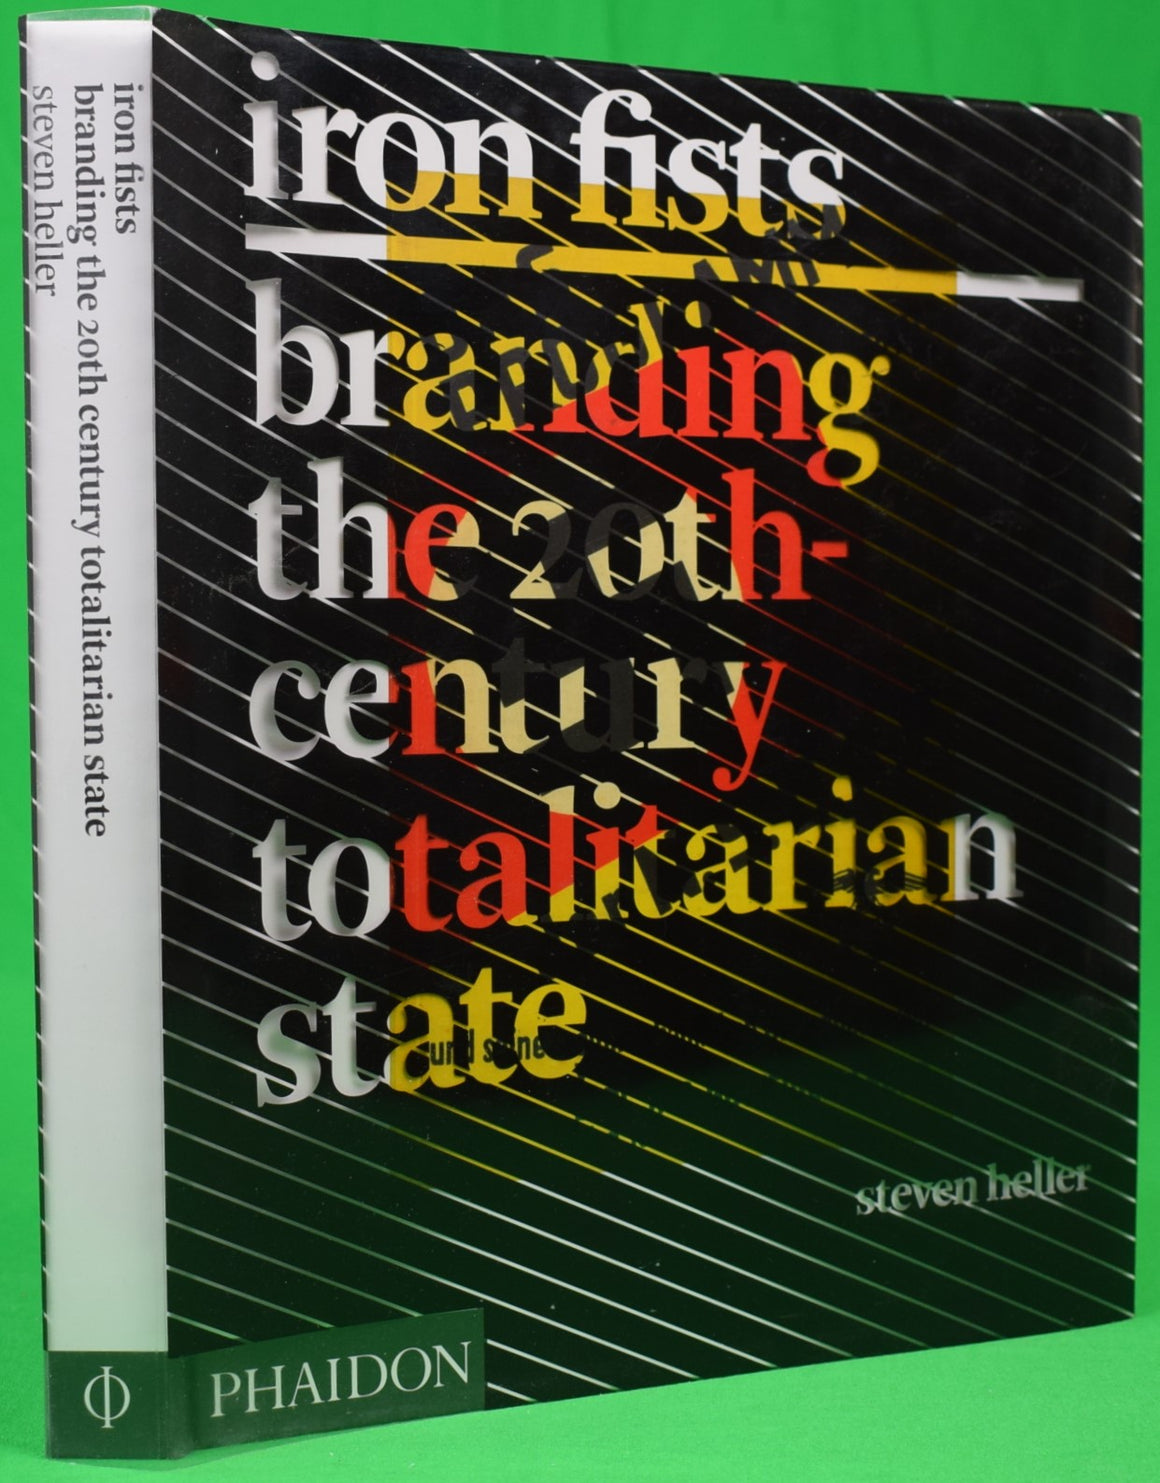 "Iron Fists Branding The 20th-Century Totalitarian State" 2008 HELLER, Steven